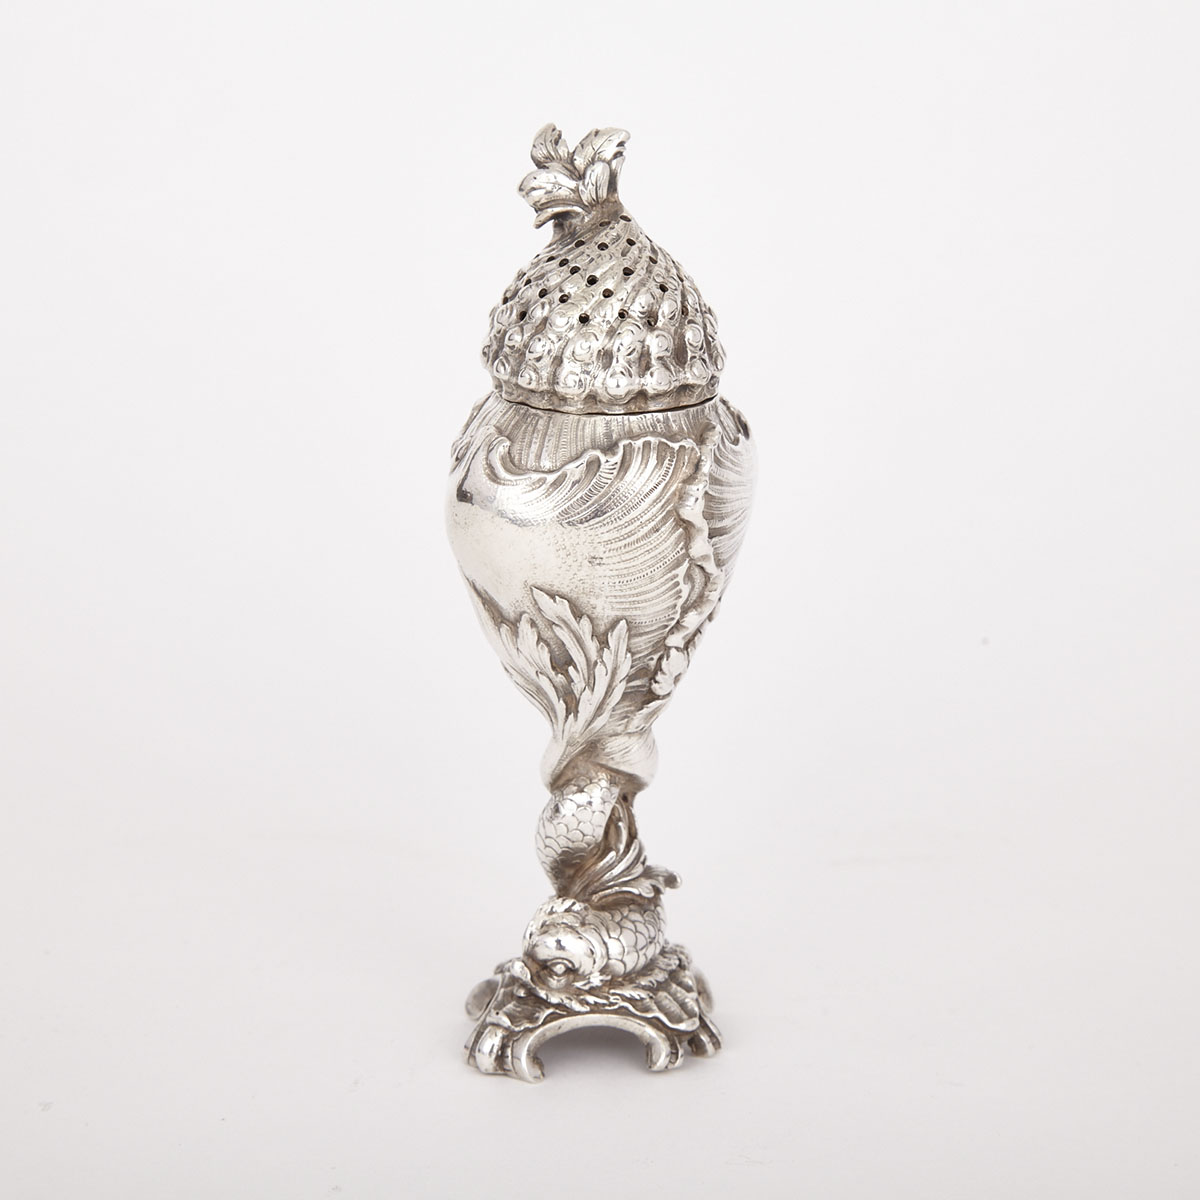 Continental Silver Caster, probably German, c.1900